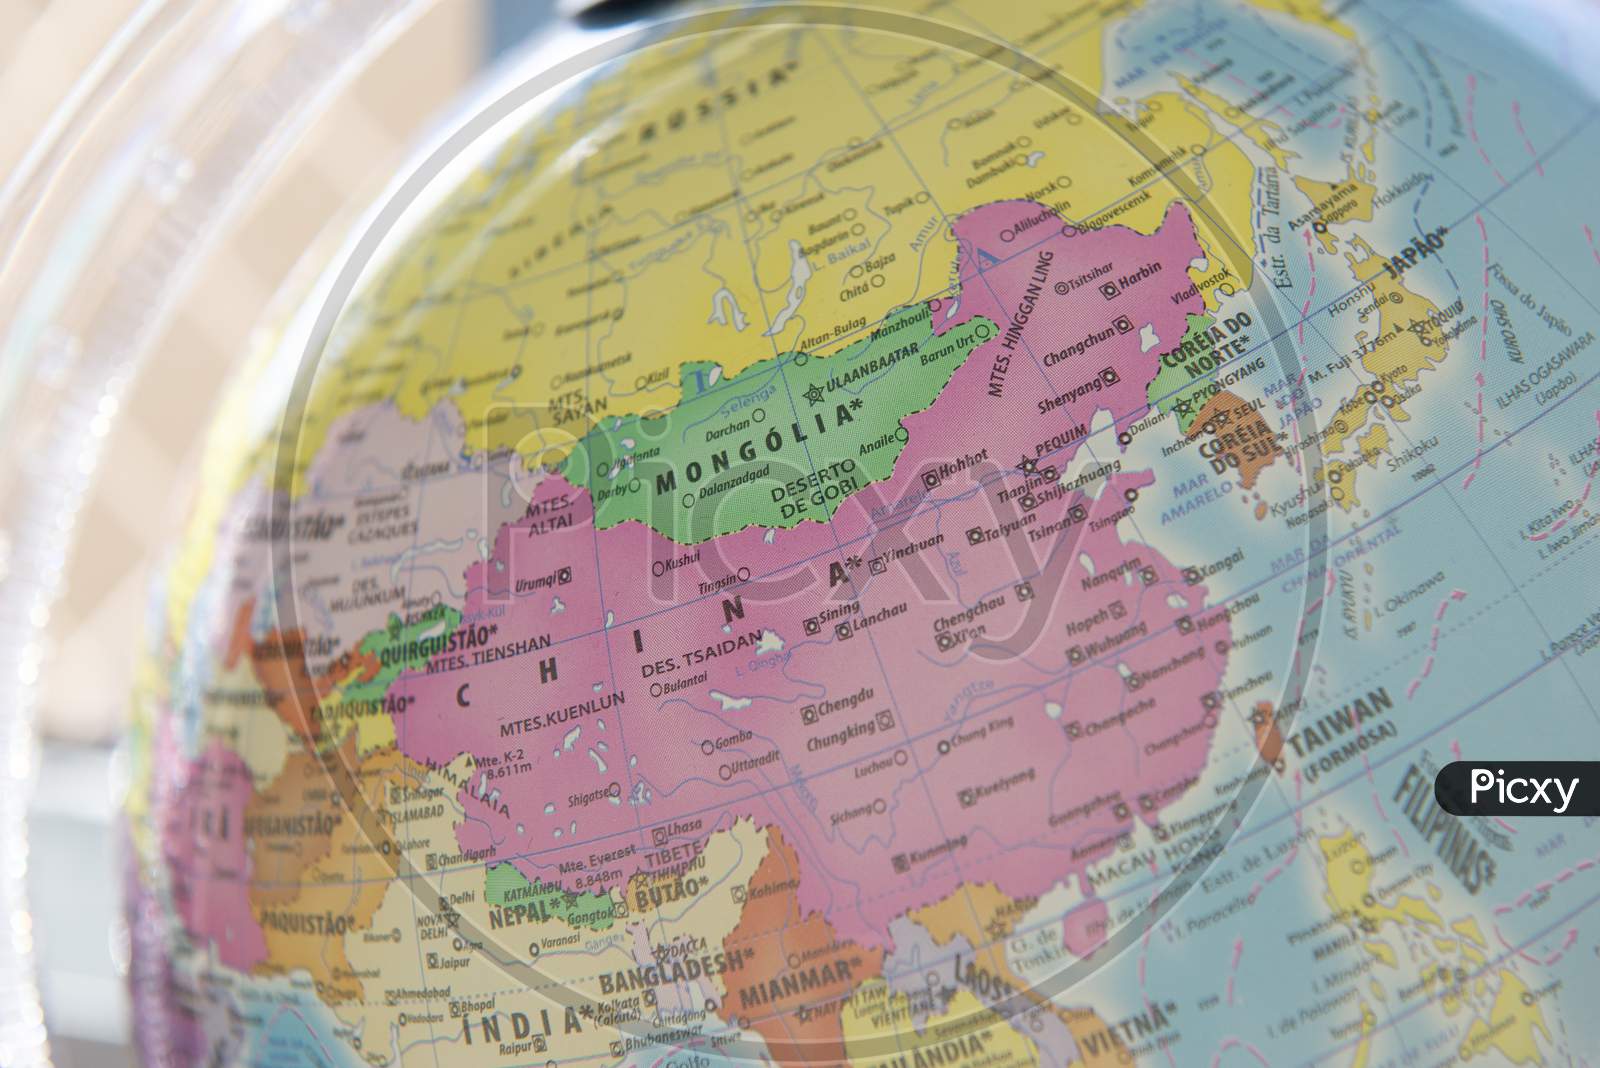 Close Up Of Terrestrial Globe With Focus On Asia And Europe.